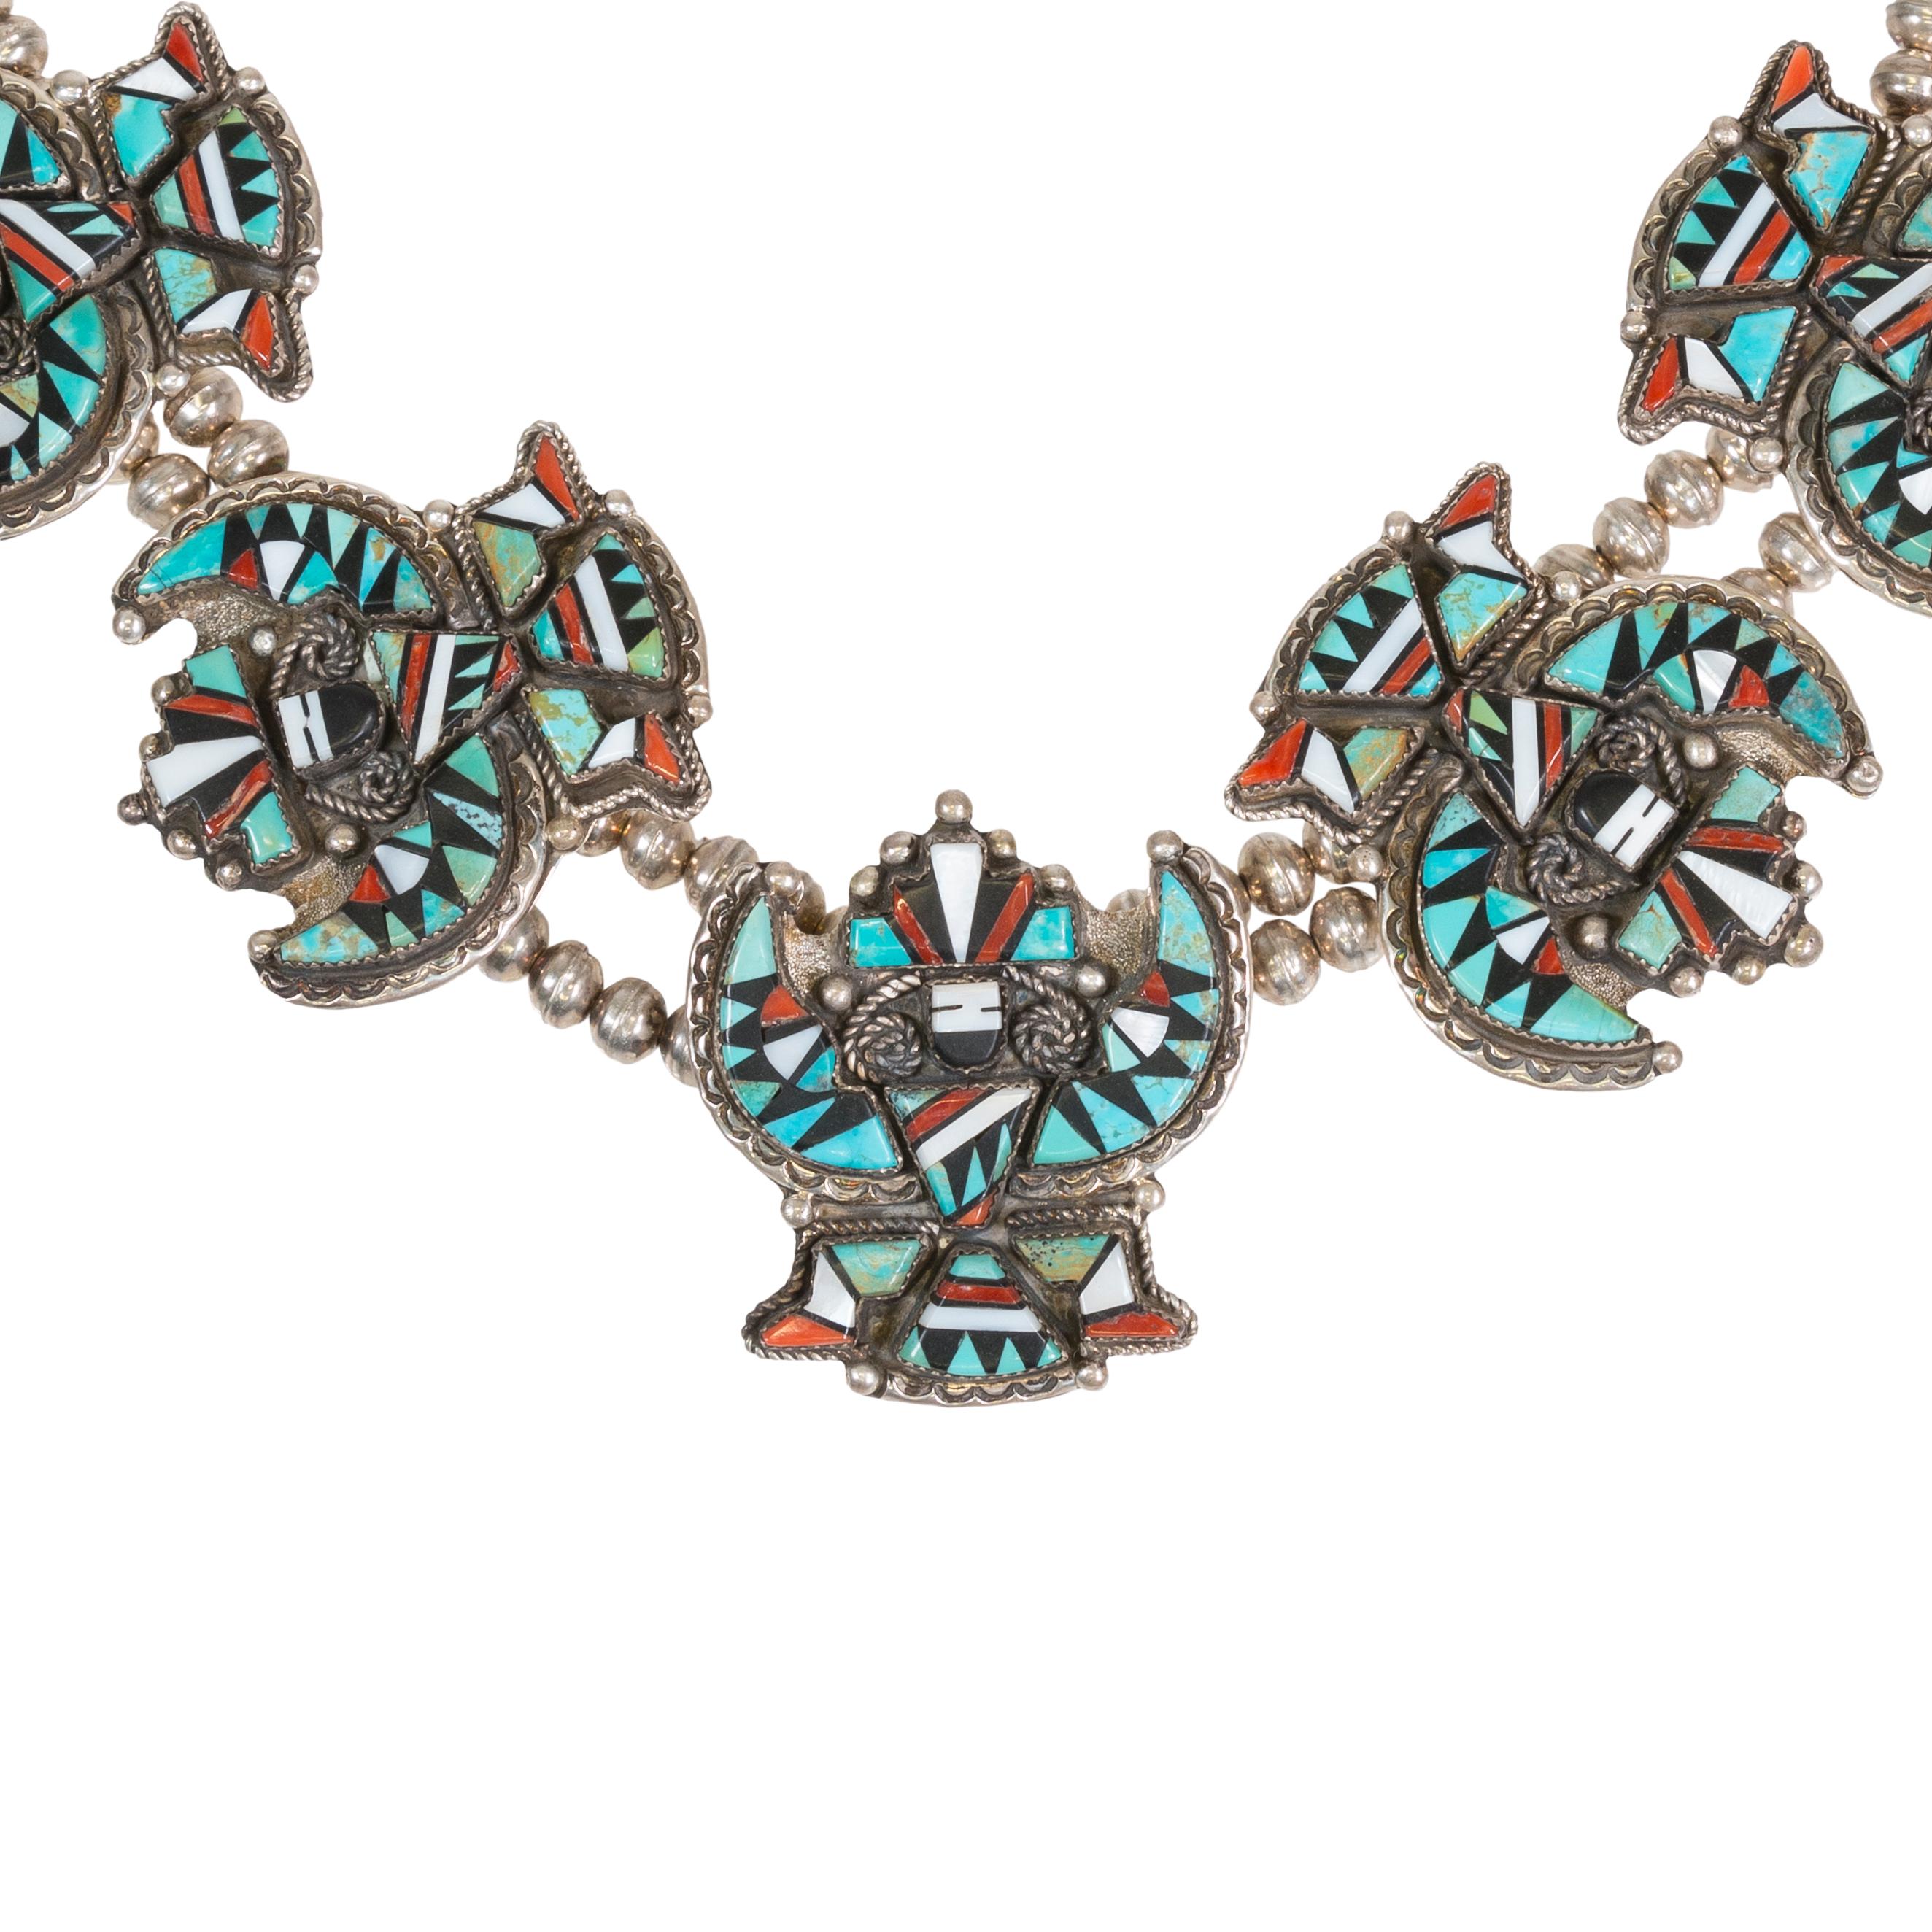 Women's or Men's Stunning Zuni Inlaid Turquoise Concho Belt, Earrings and Necklace Set